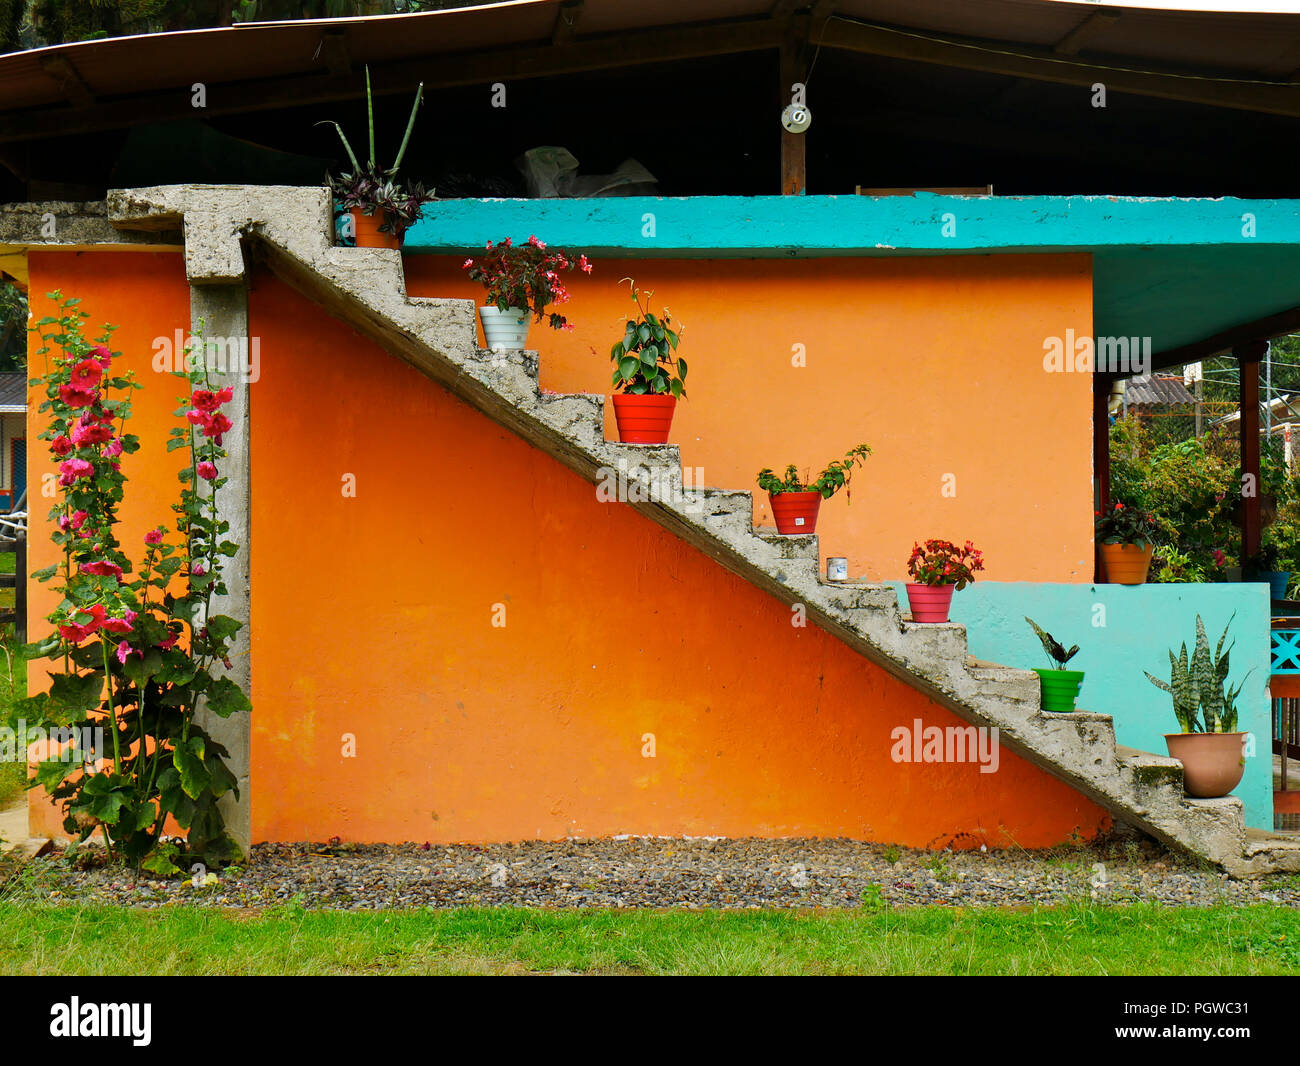 concrete wall painted in orange and ligh blue with a stair filled with pots placed every other step country house Stock Photo